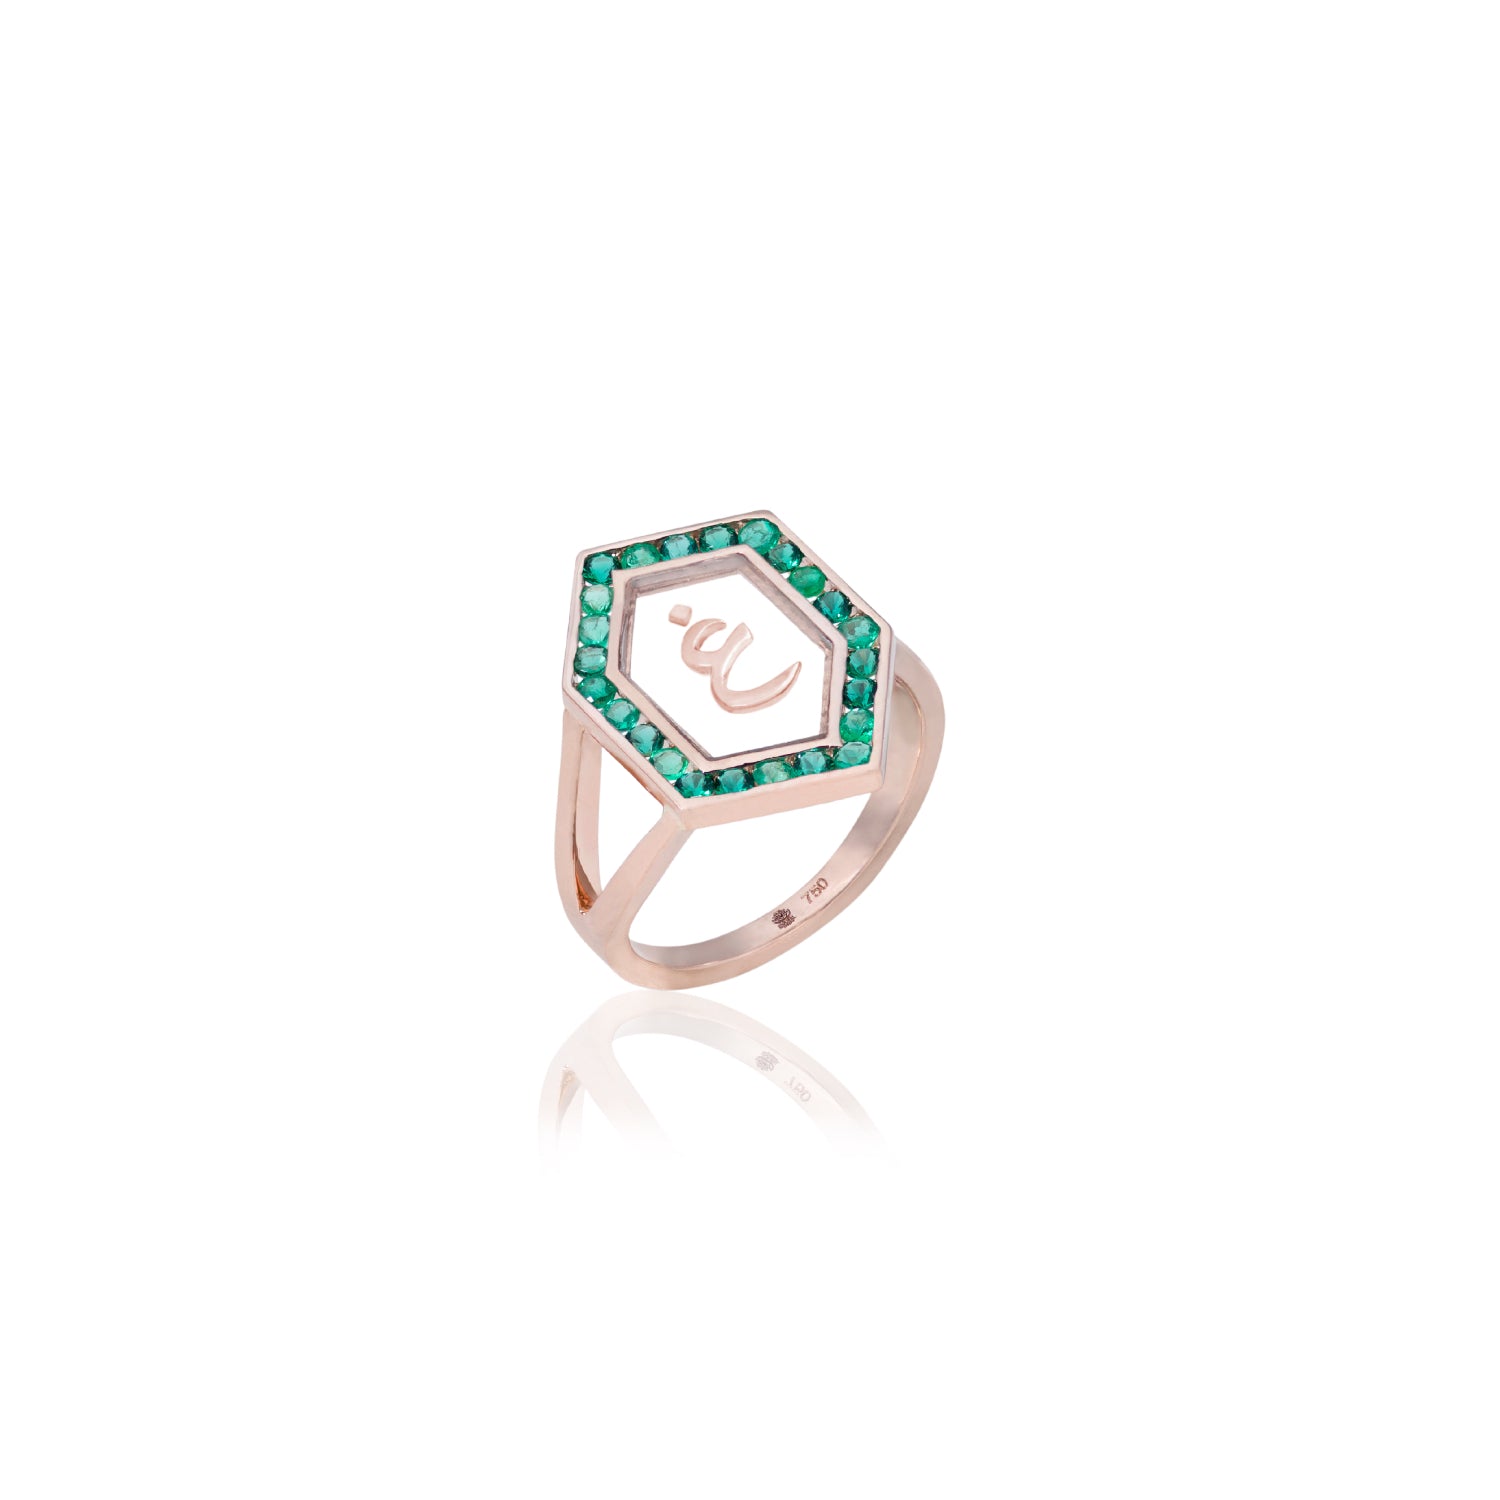 Qamoos 1.0 Letter غ Emerald Ring in Rose Gold